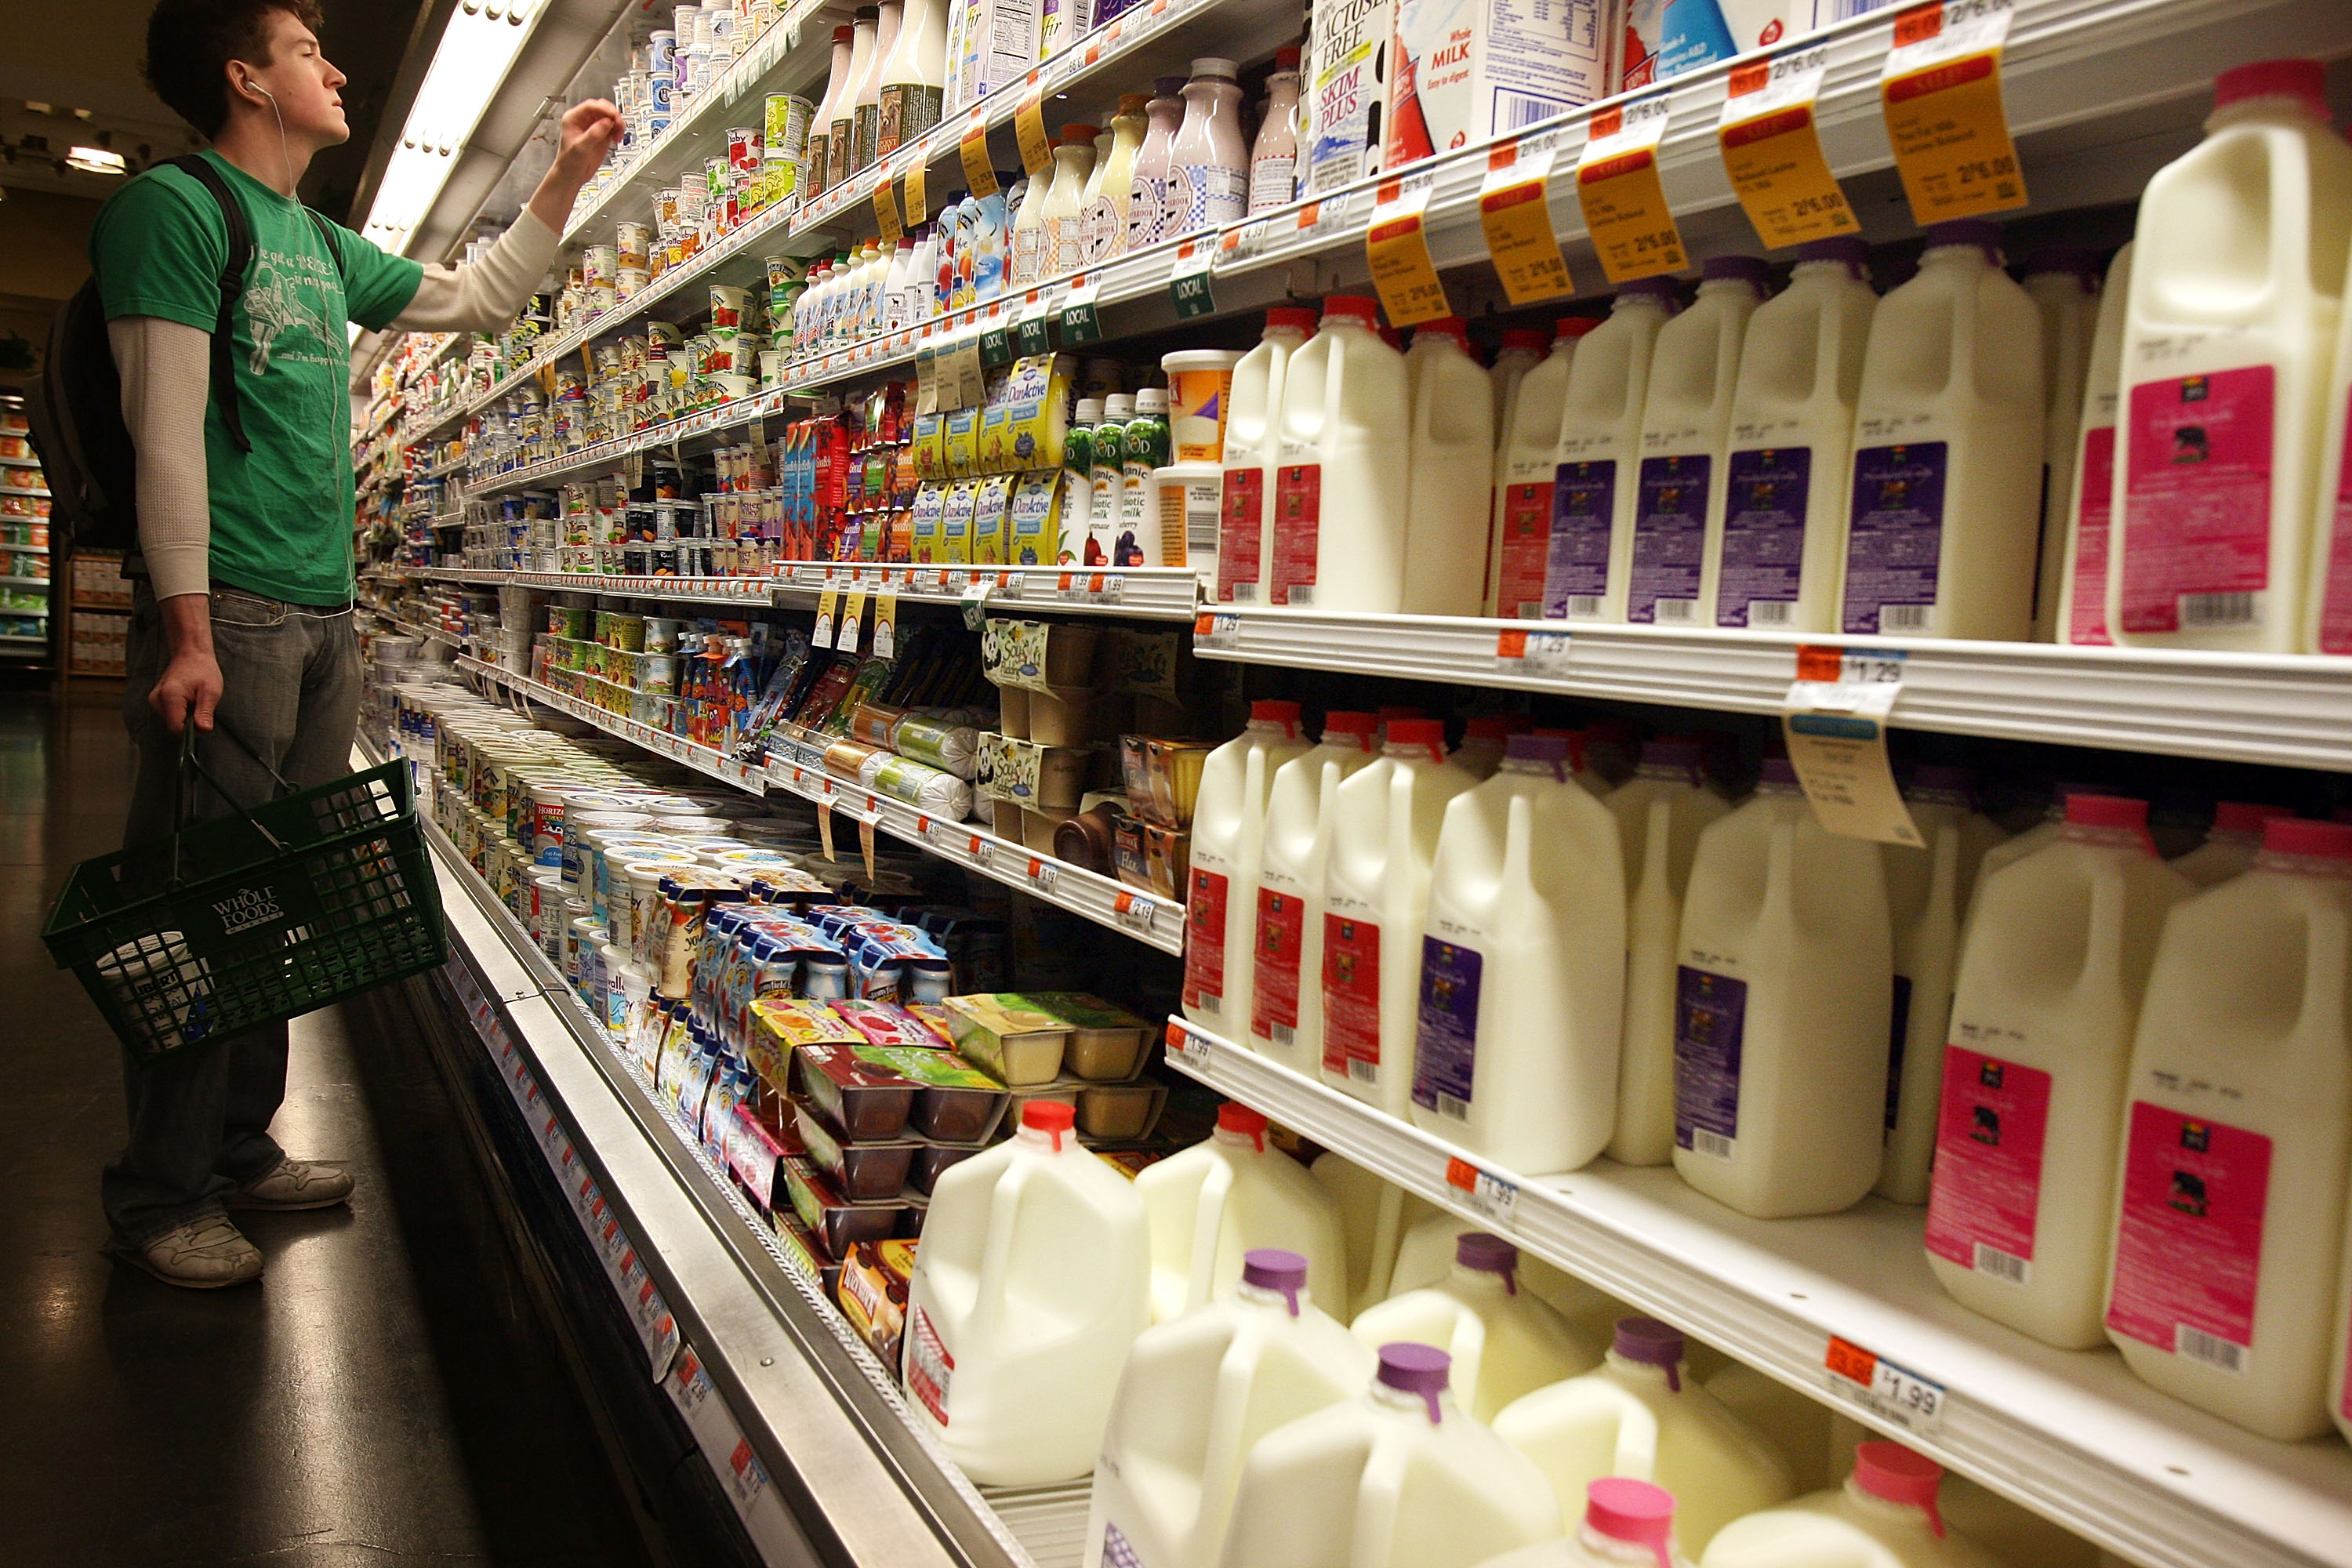 Milk, grocery prices on the rise if Congress ignores farm bill - CBS News